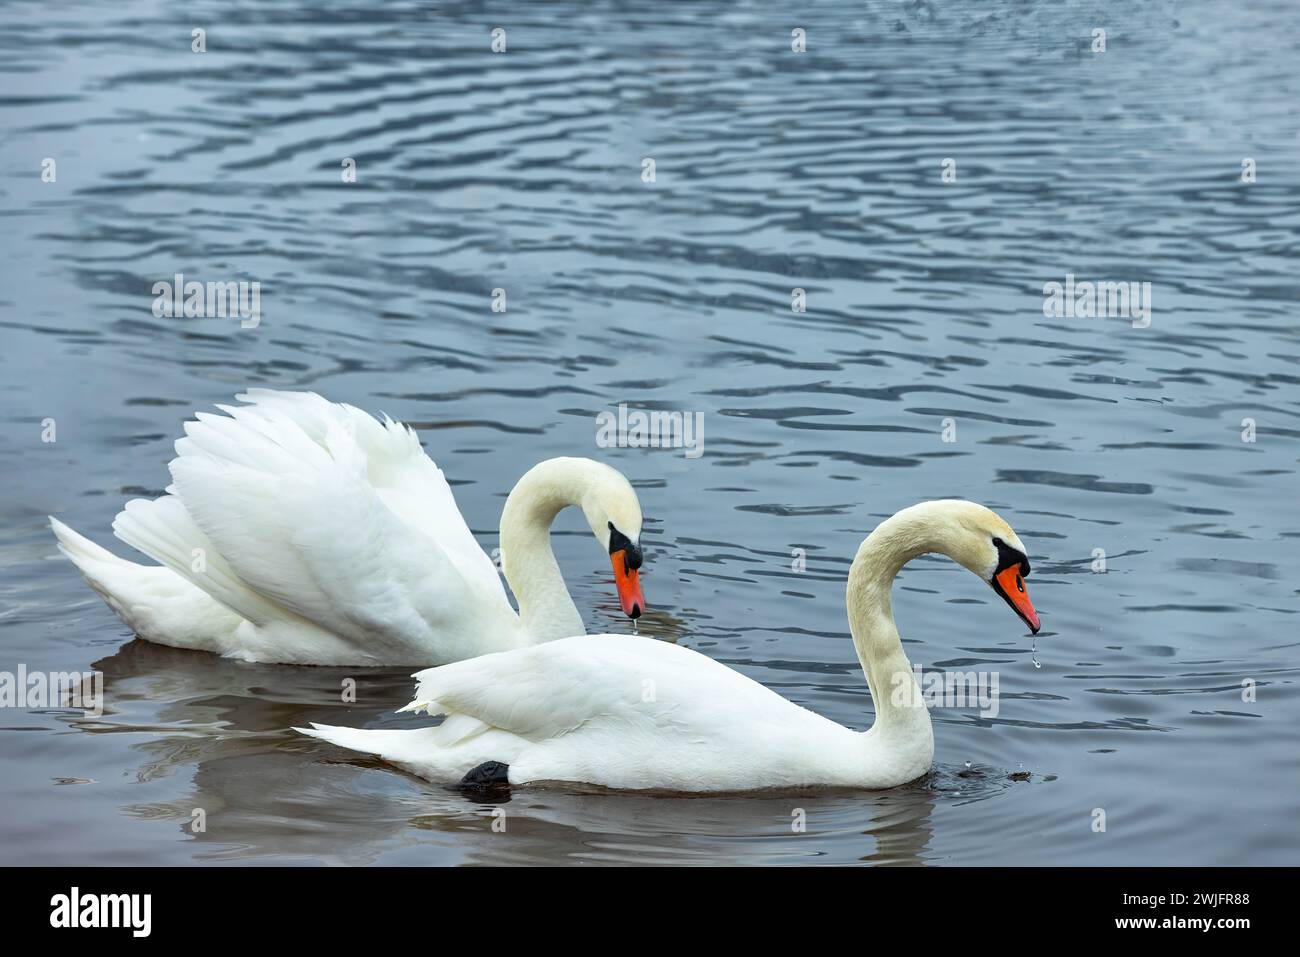 A pair of white swans swim on the surface of the river on a winter morning. Stock Photo